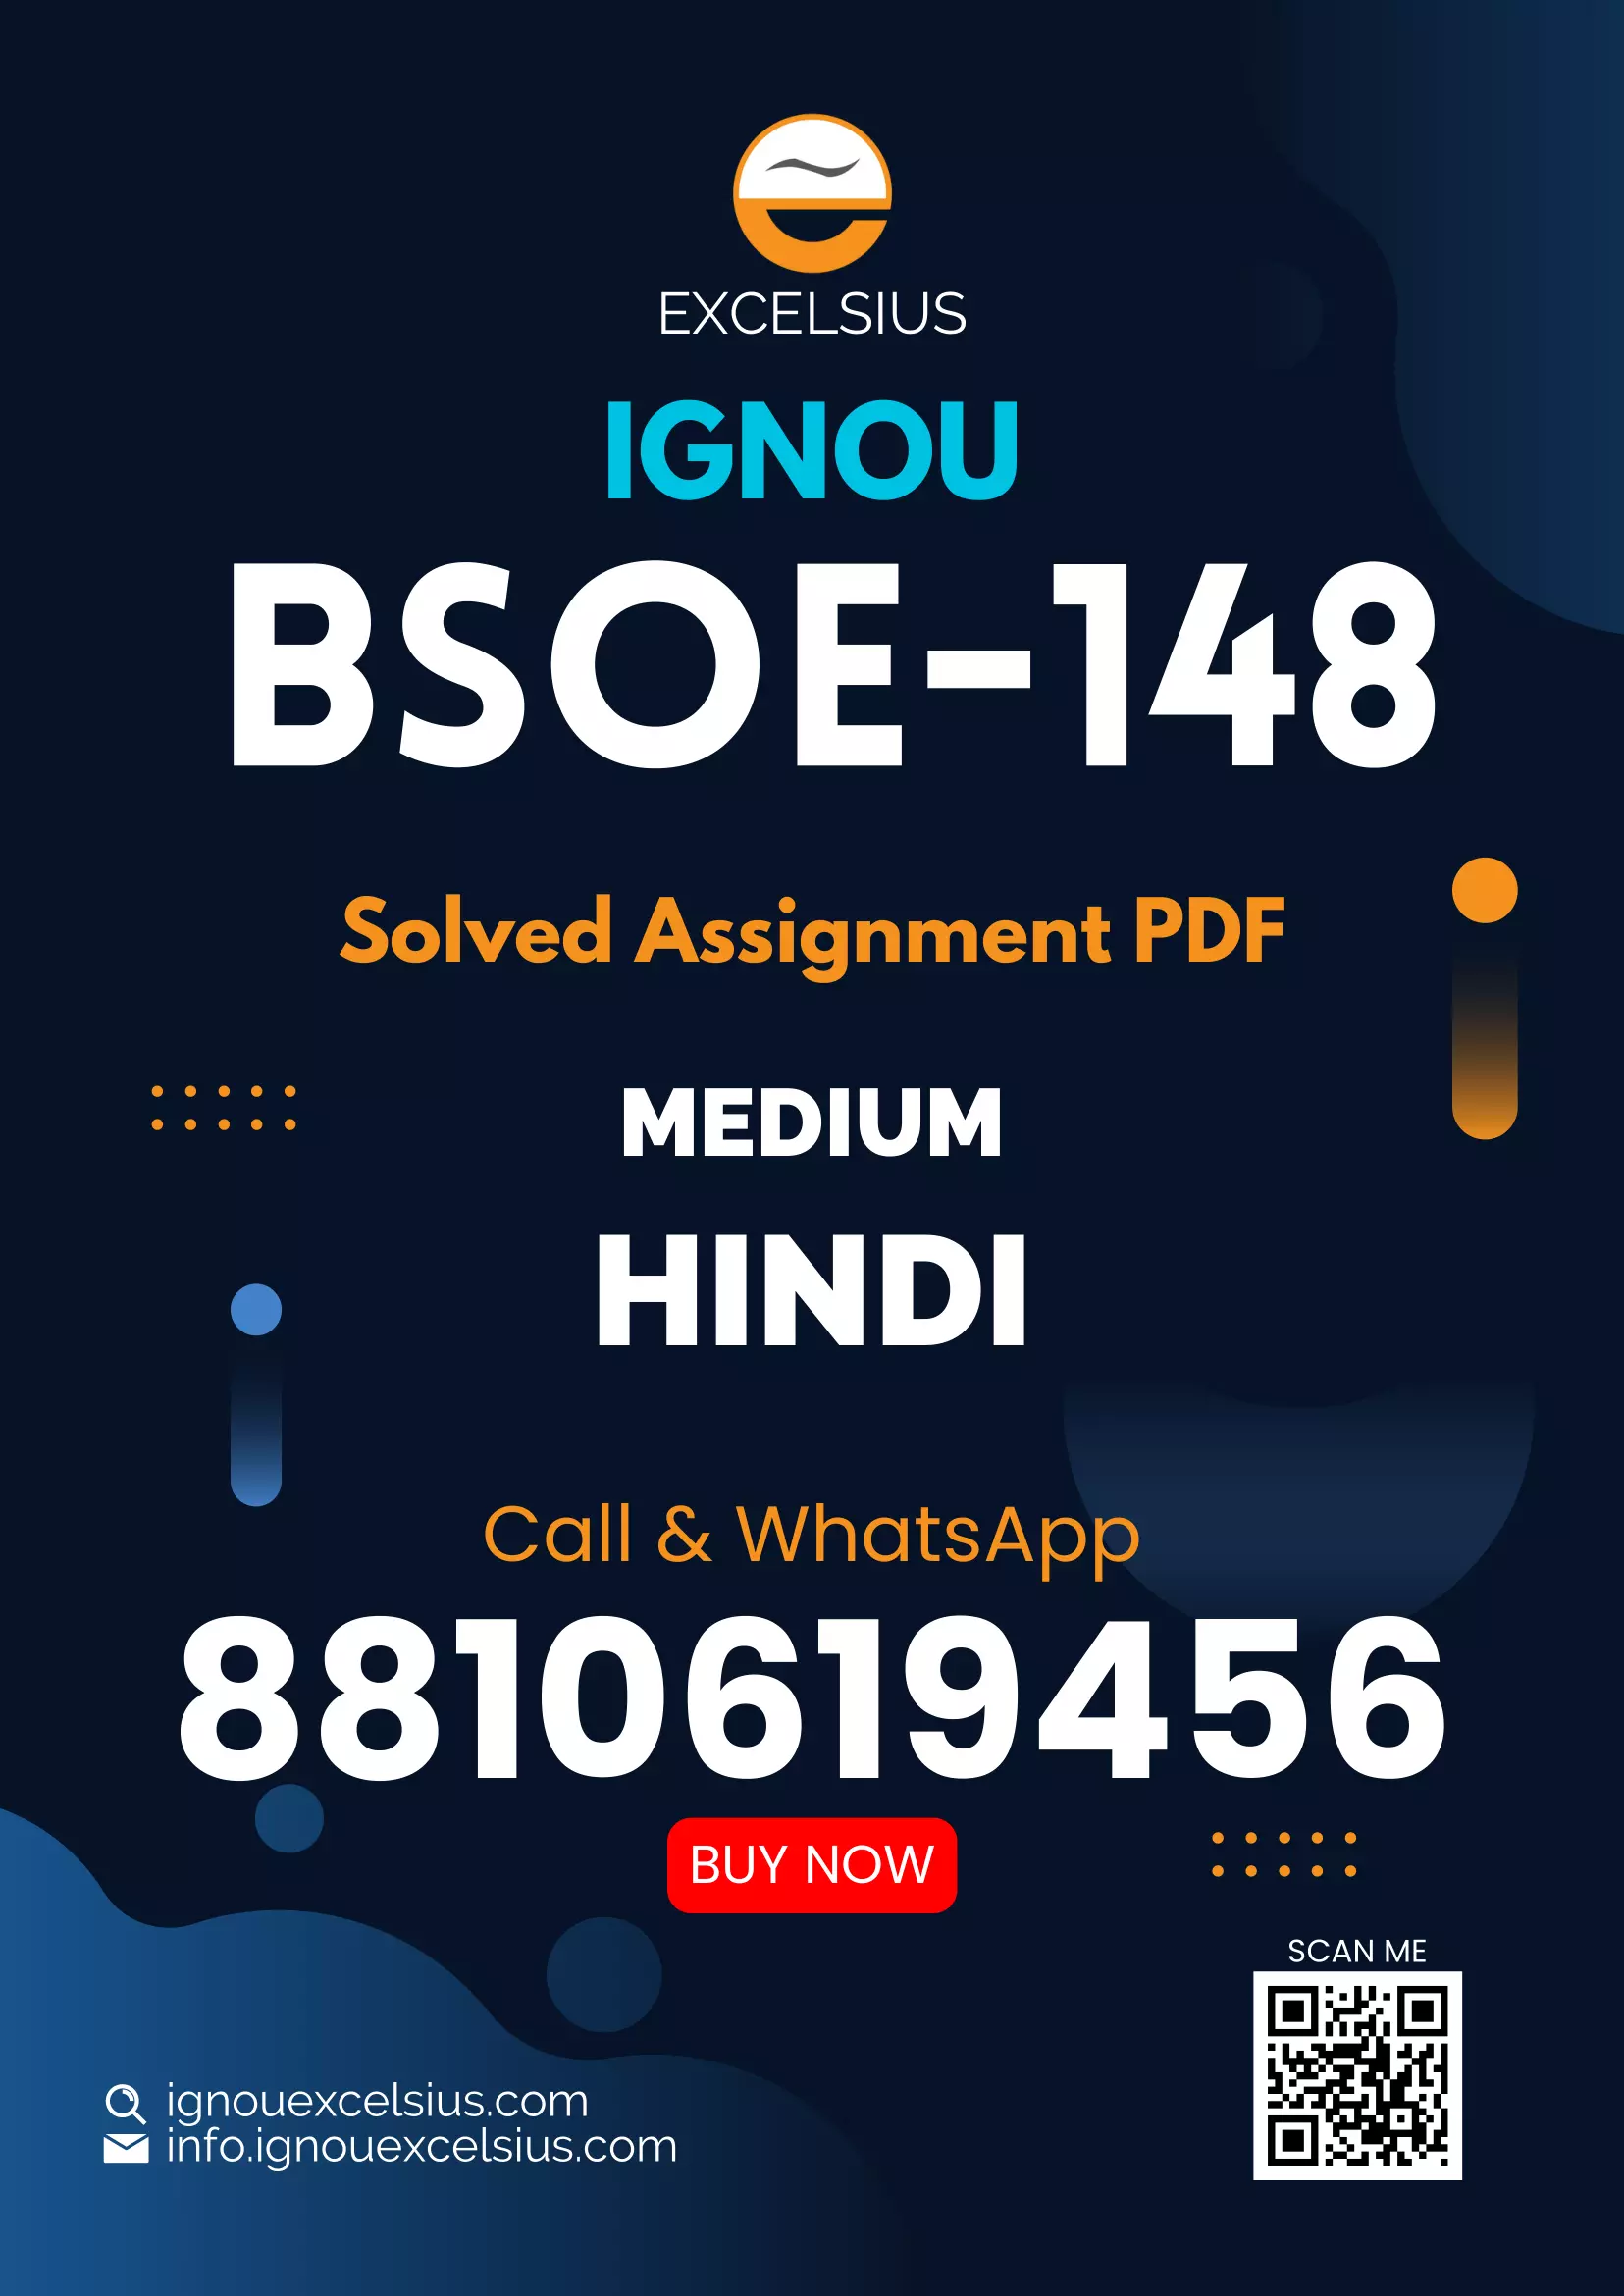 IGNOU BSOE-148 - Social Stratification, Latest Solved Assignment-July 2022 – January 2023